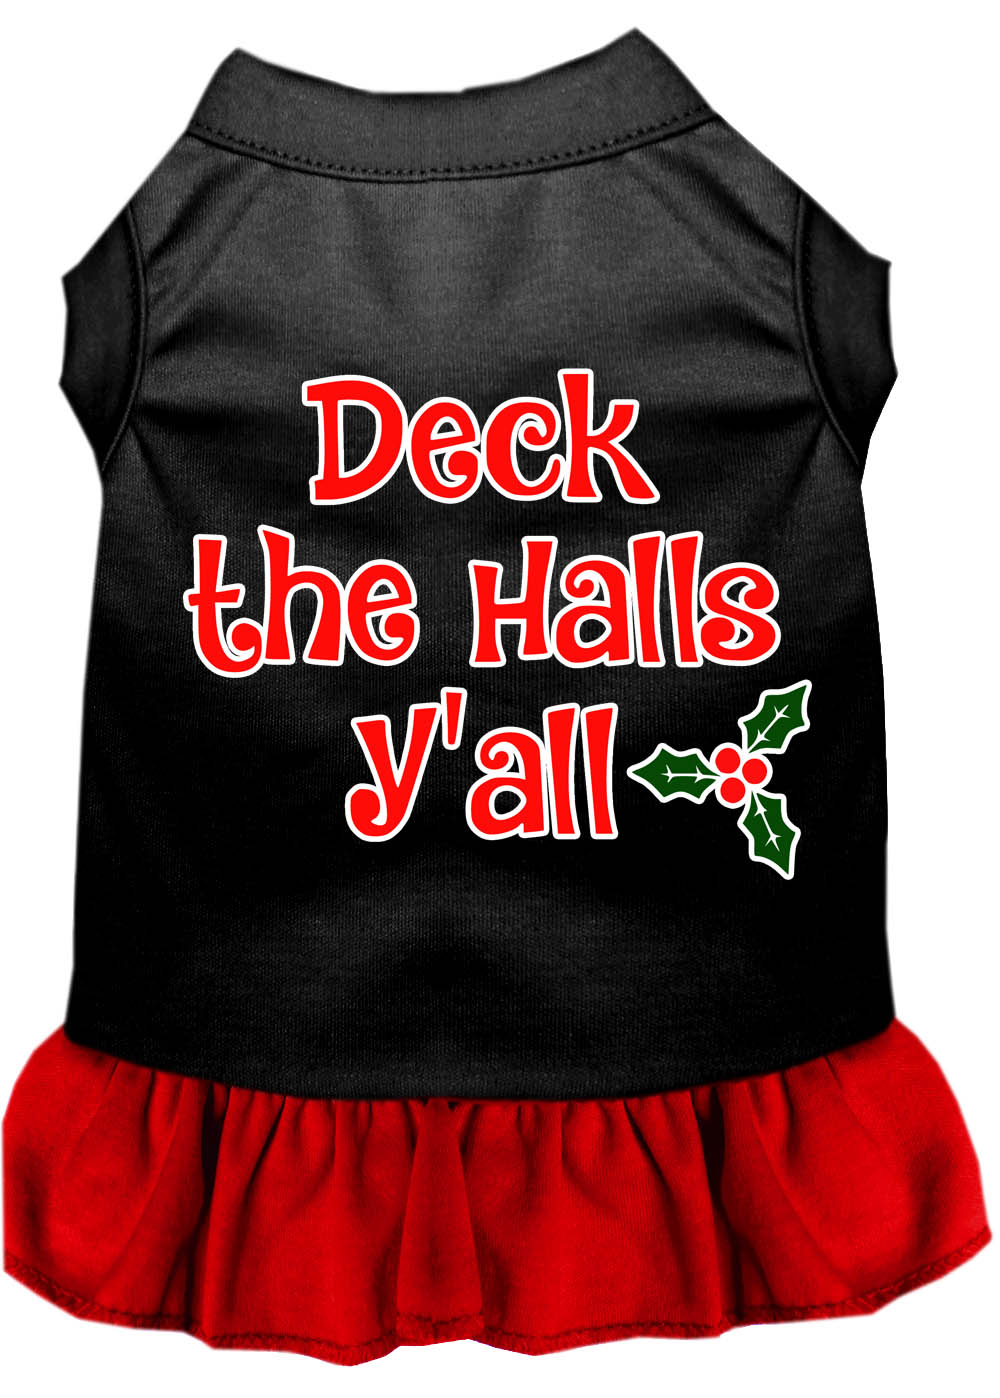 Deck the Halls Y'all Screen Print Dog Dress Black with Red XS